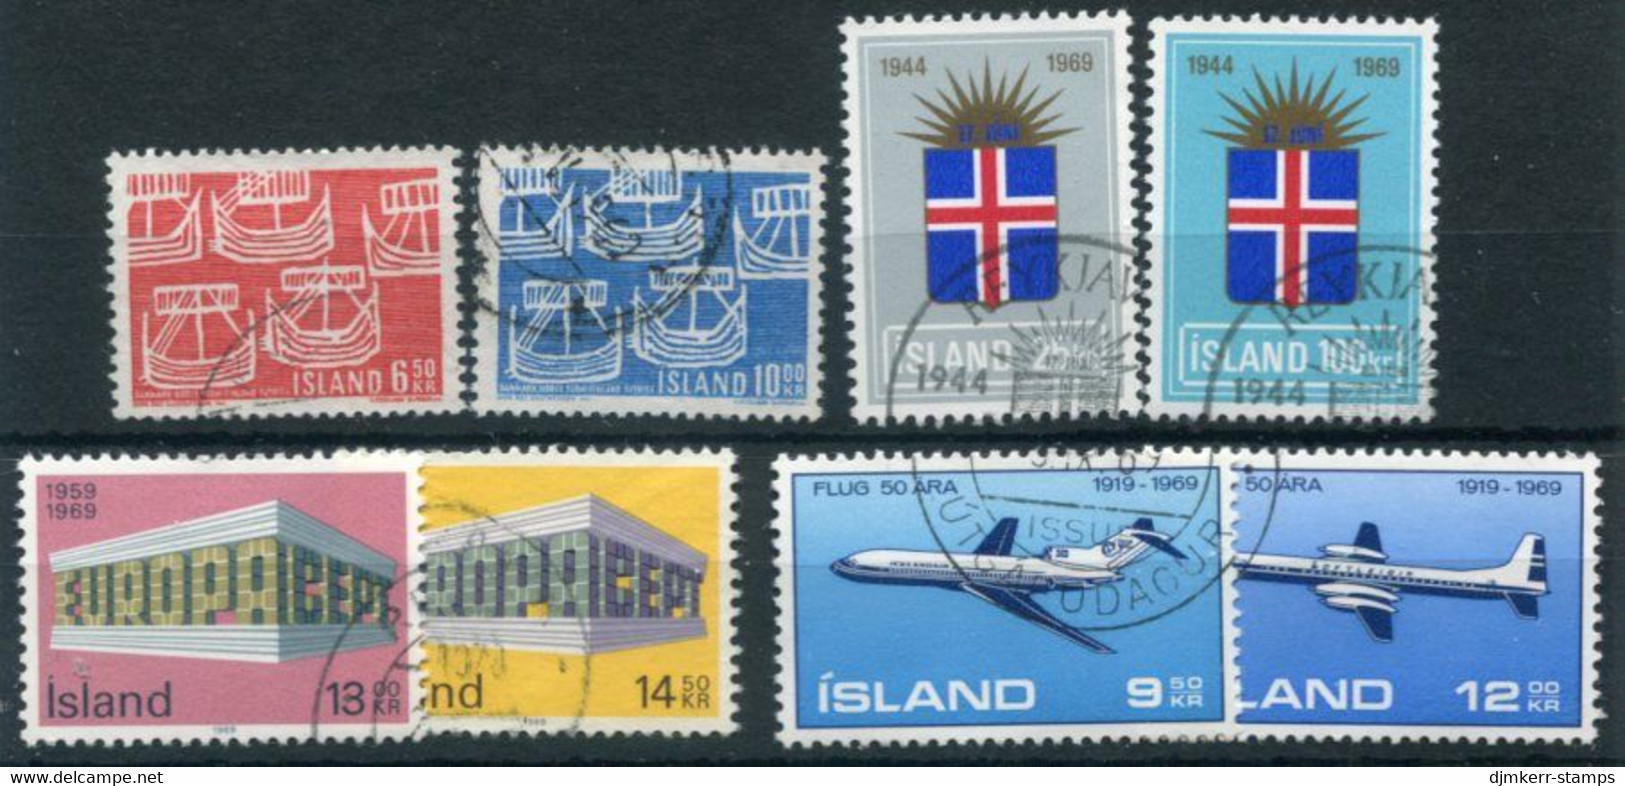 ICELAND 1969 Complete Issues Used.  Michel 425-33 - Gebraucht